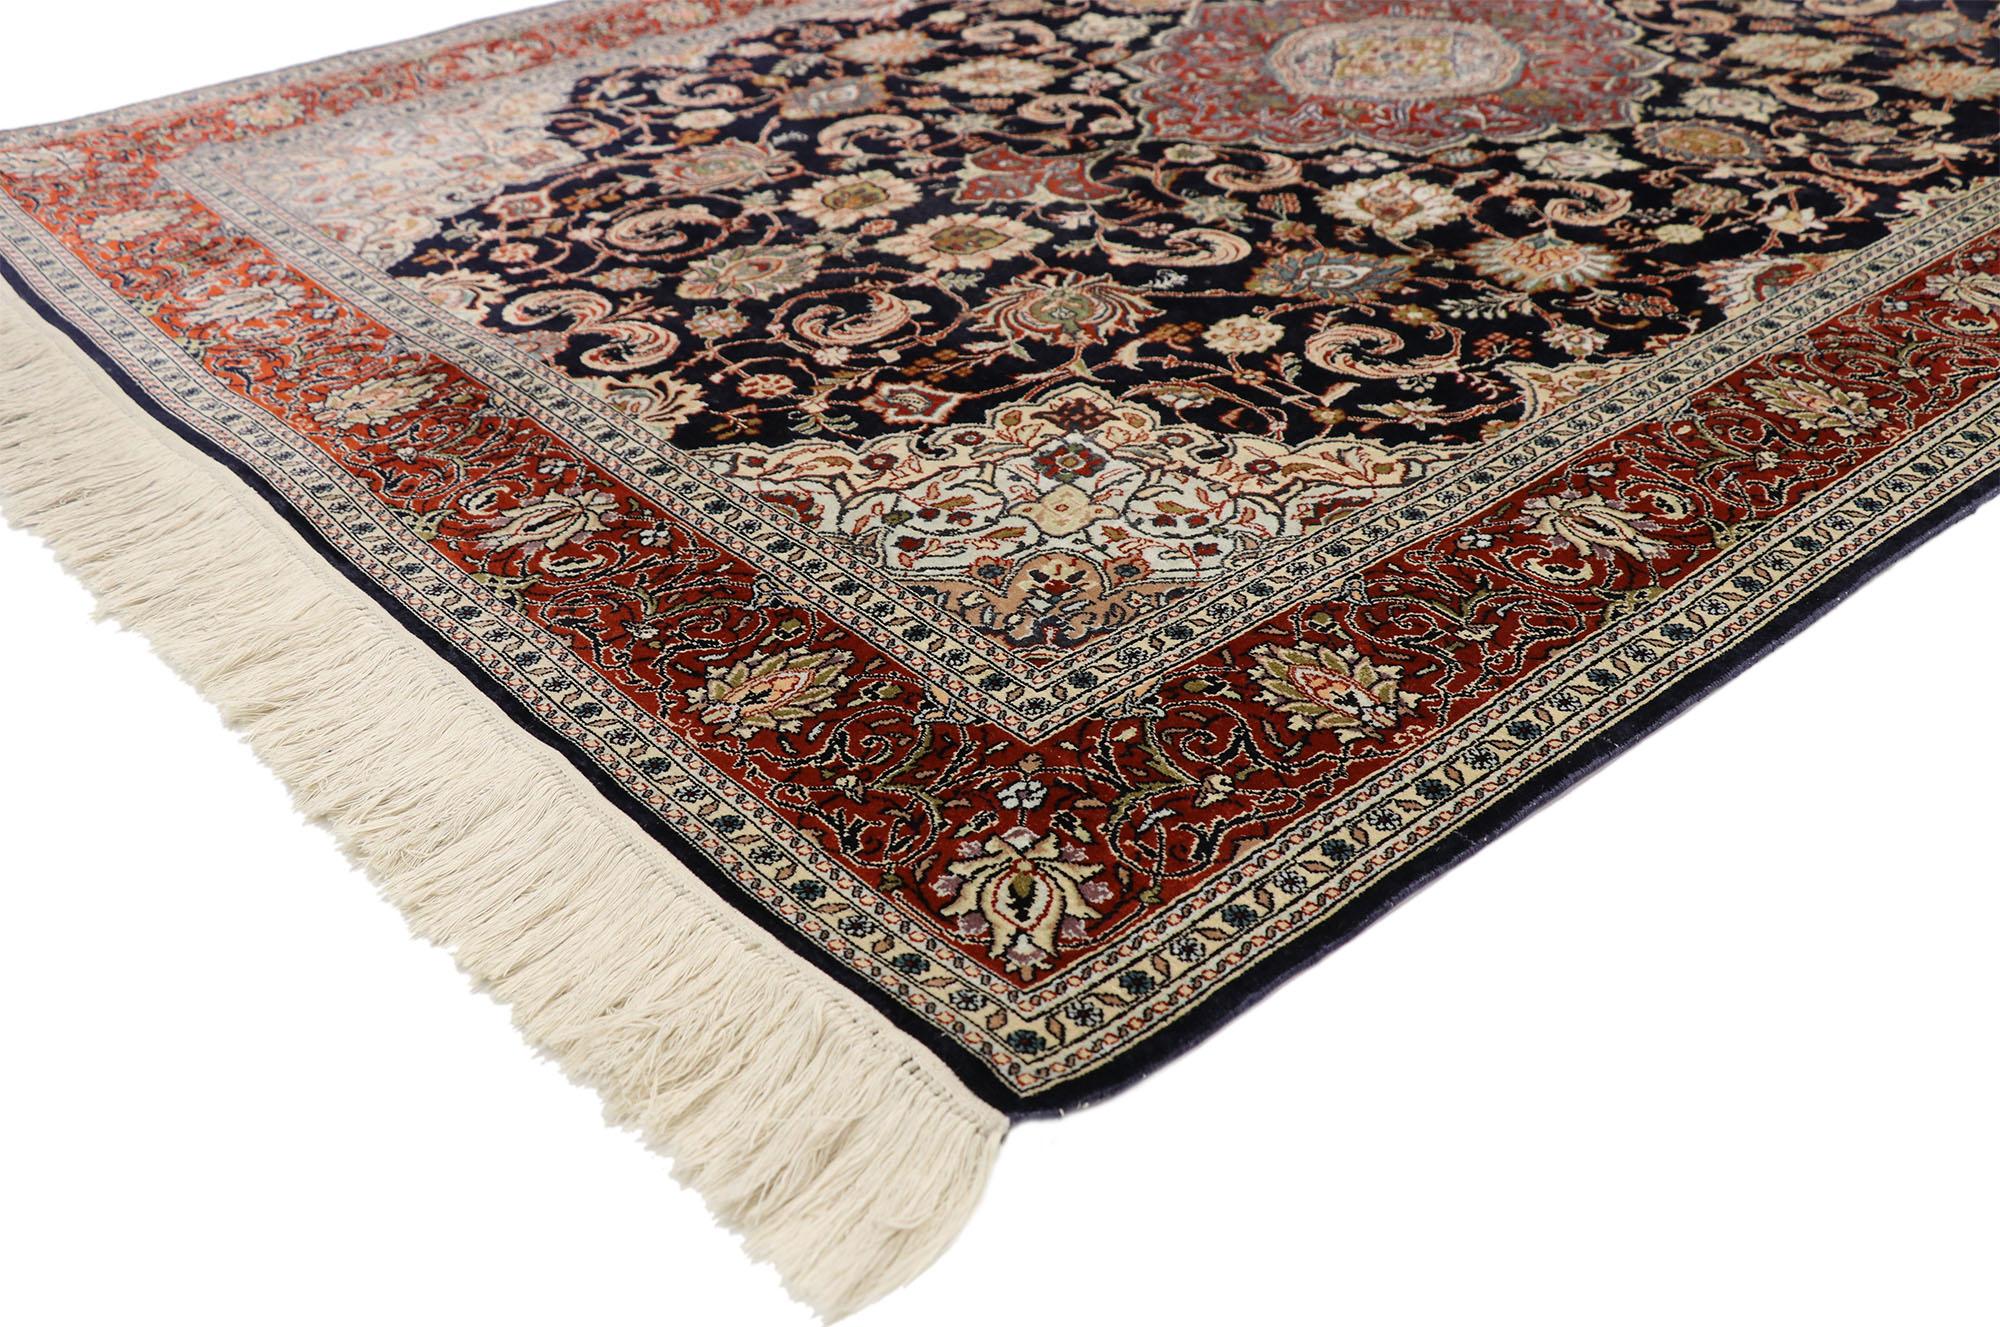 77371, Vintage Persian Kashan Silk Rug with Old World Dutch Renaissance Style 04'01 x 06'01. With its timeless elegance and regal charm, this hand knotted silk vintage Persian Kashan accent rug features a sixteen point scalloped medallion anchored